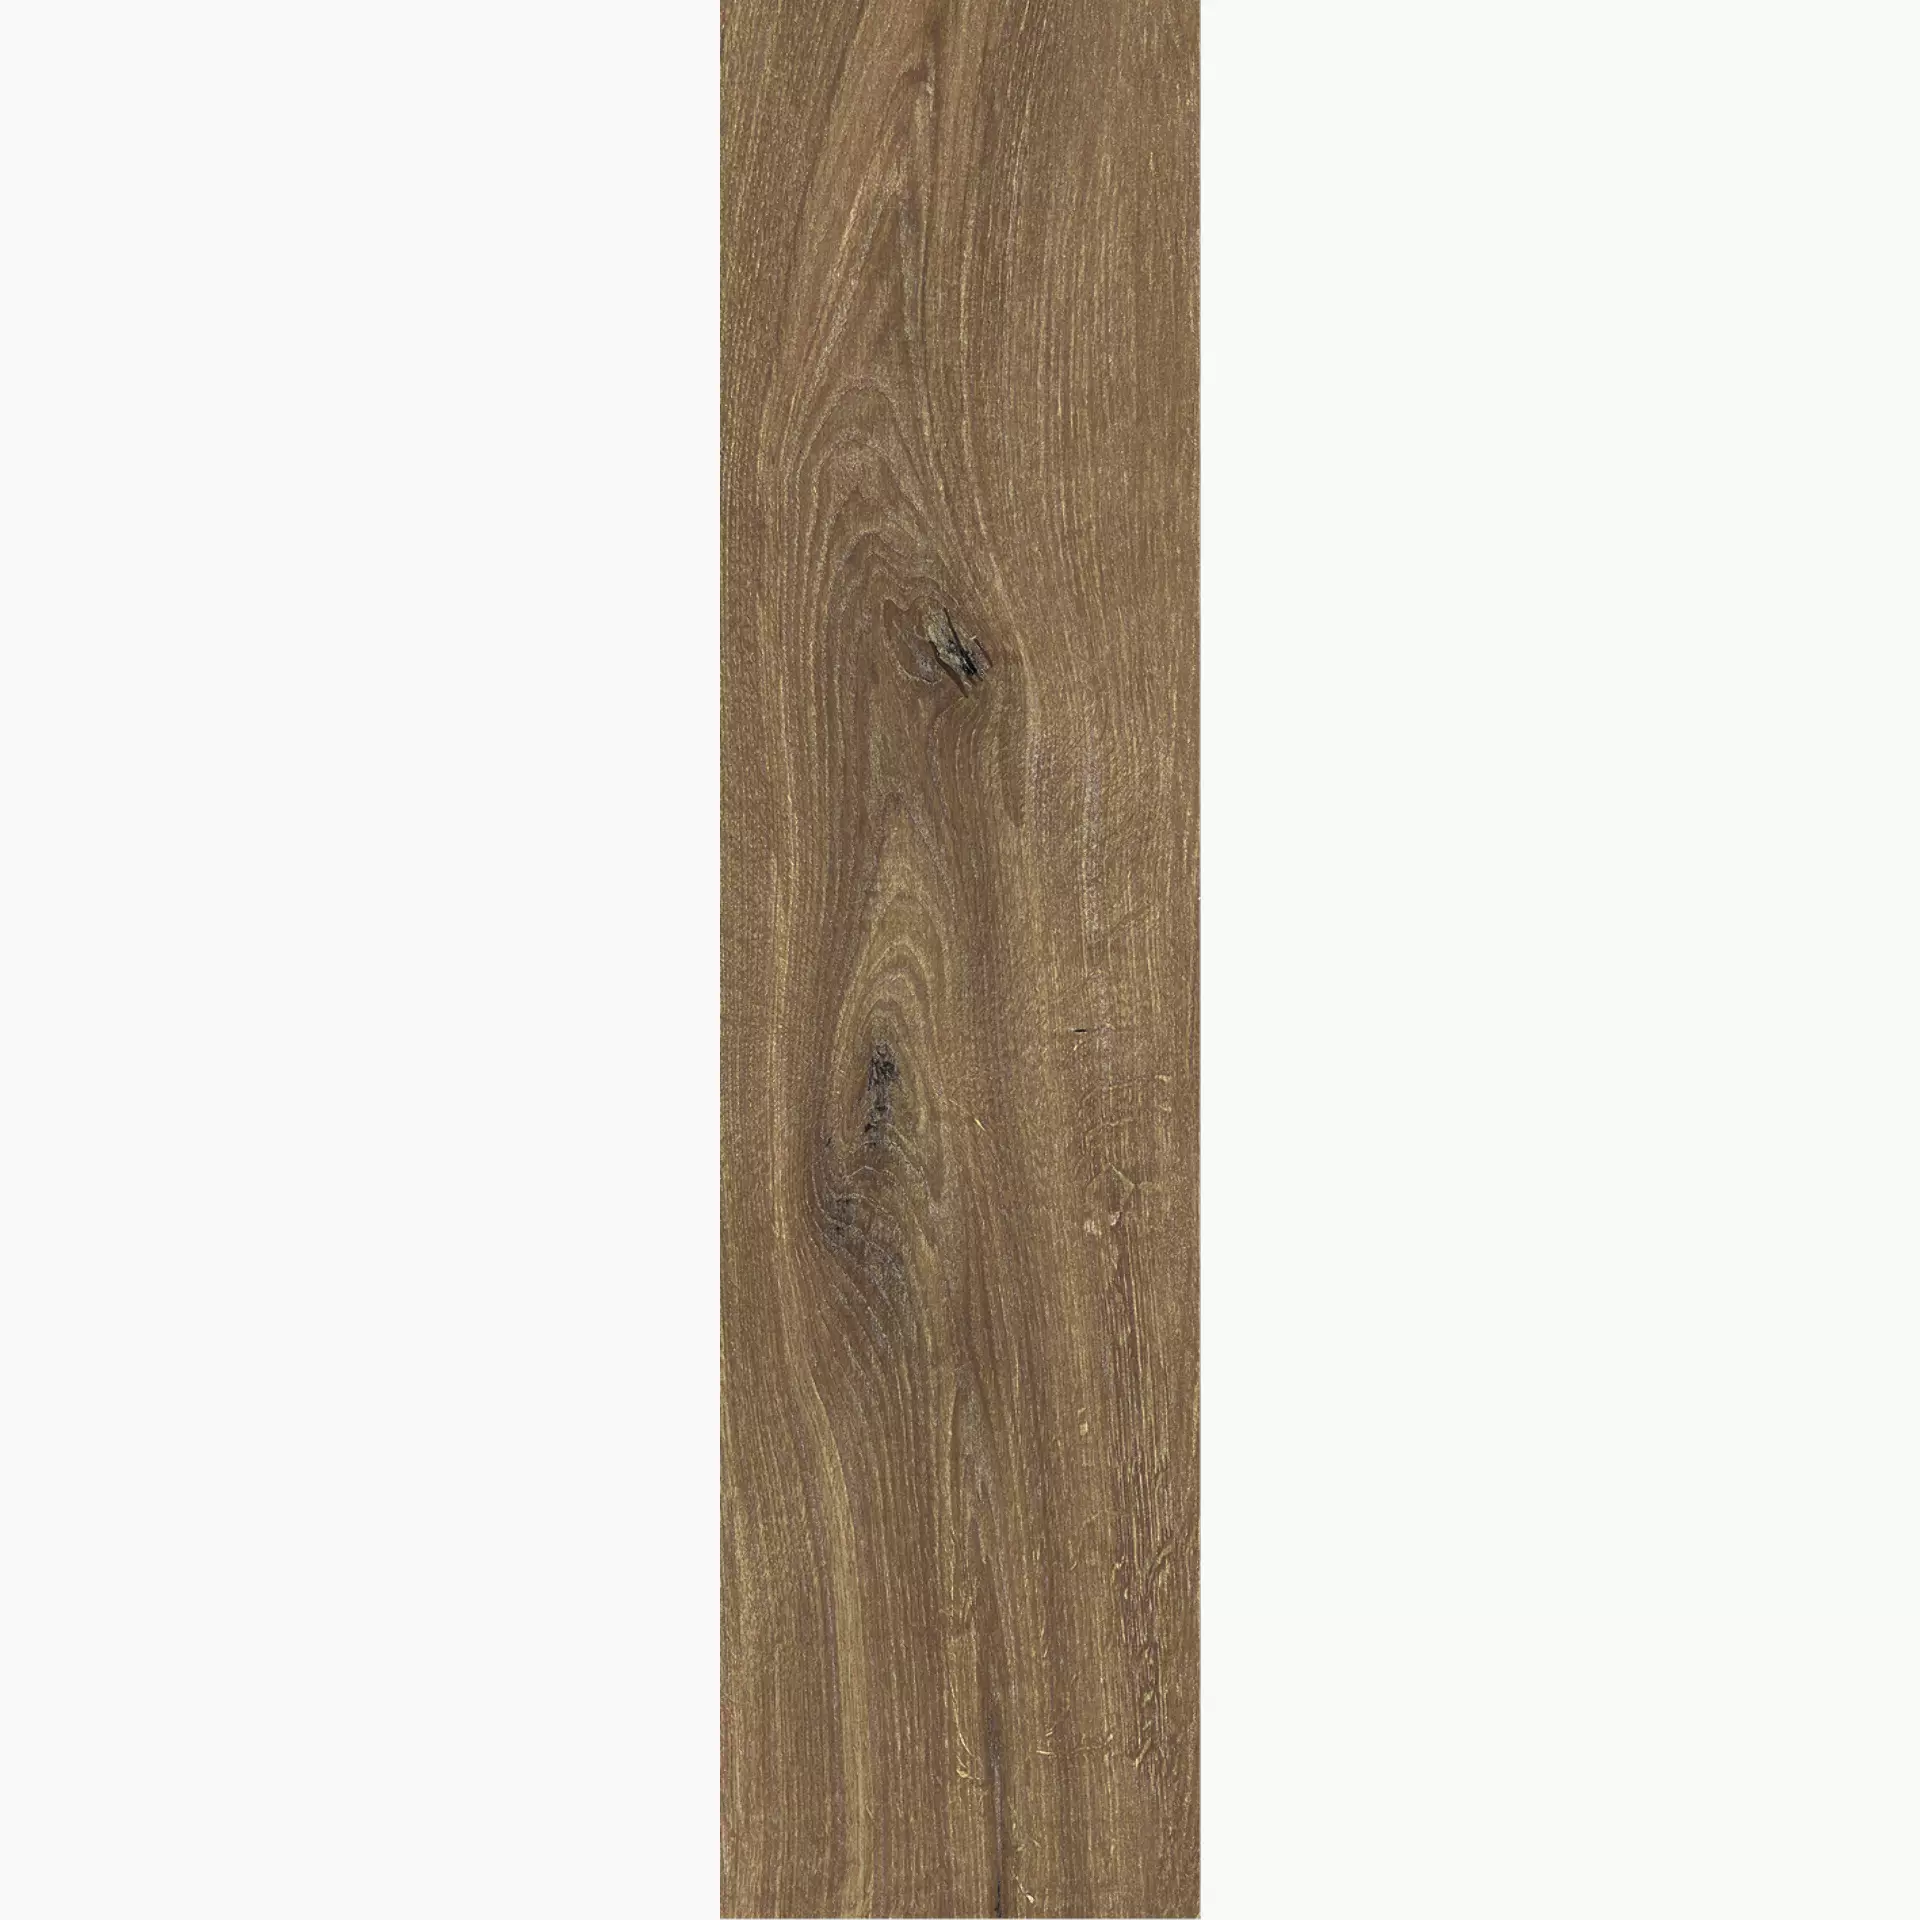 Novabell Artwood Clay Naturale AWD23RT 30x120cm rectified 9mm